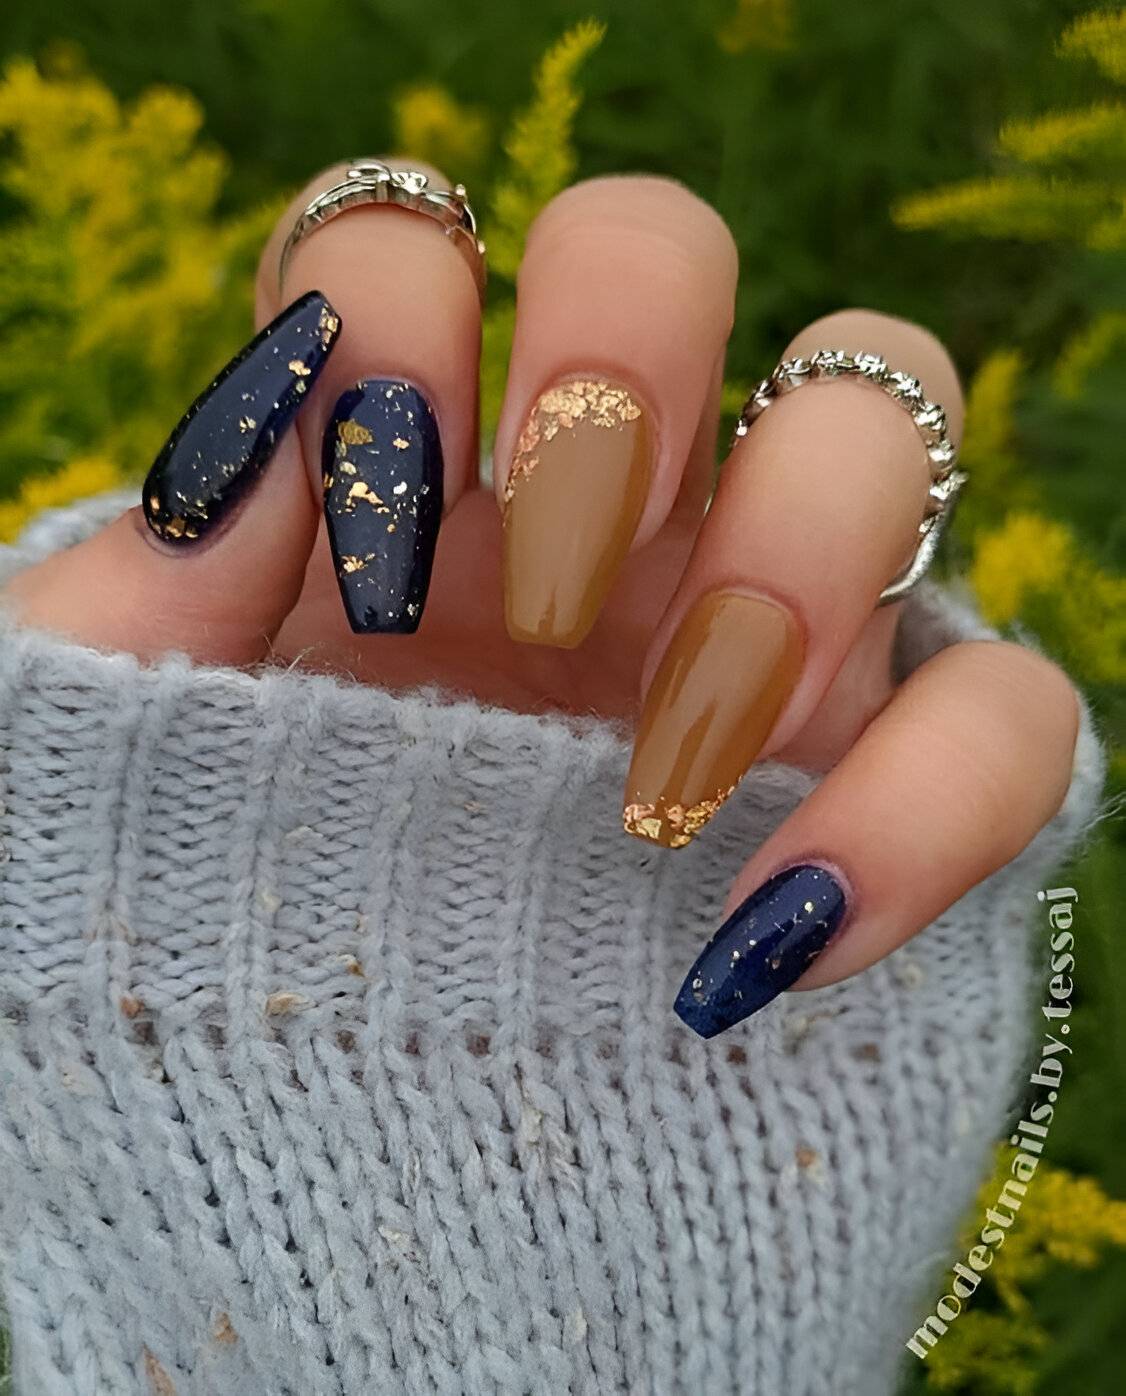 30 Autumn Nail Designs Too Chic To Resist - 203